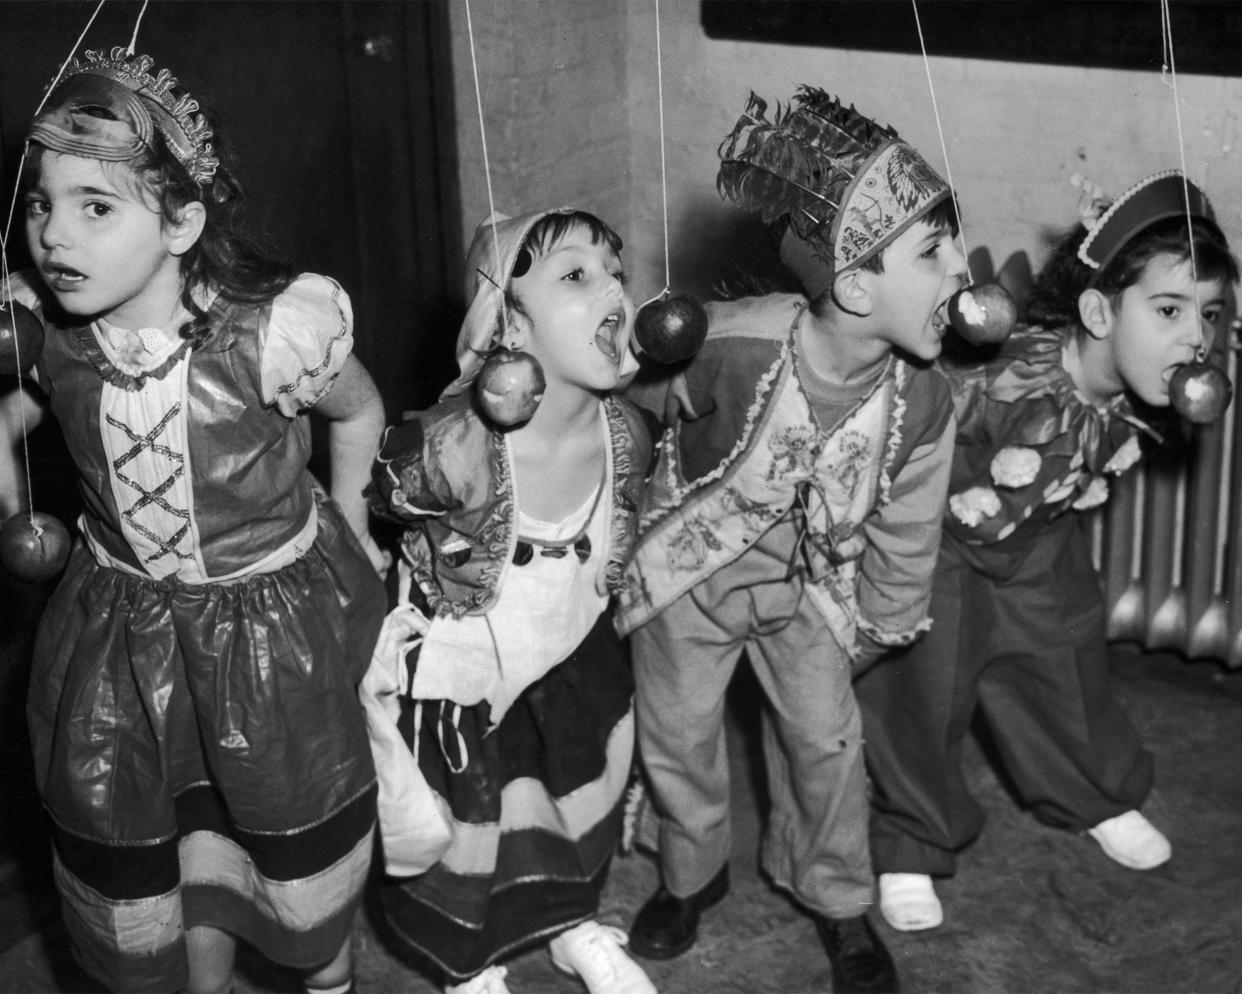 Elizabeth Bianco, Barbara Lee, Anthony Dimino and Theresa Imbronone join in the fun at a Halloween party in New York City.